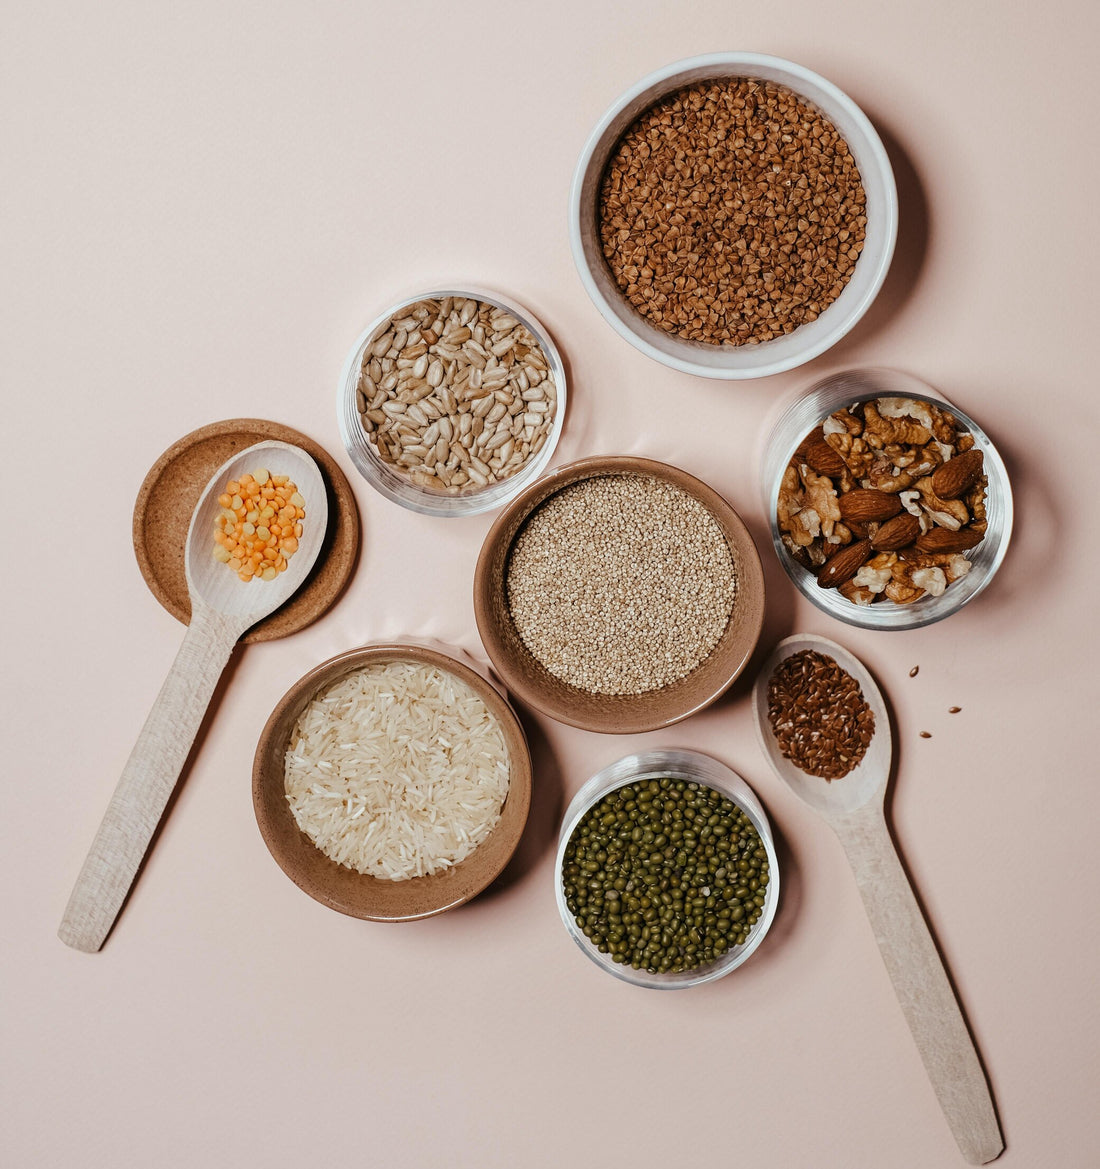 Bowls of grains, legumes, and nuts